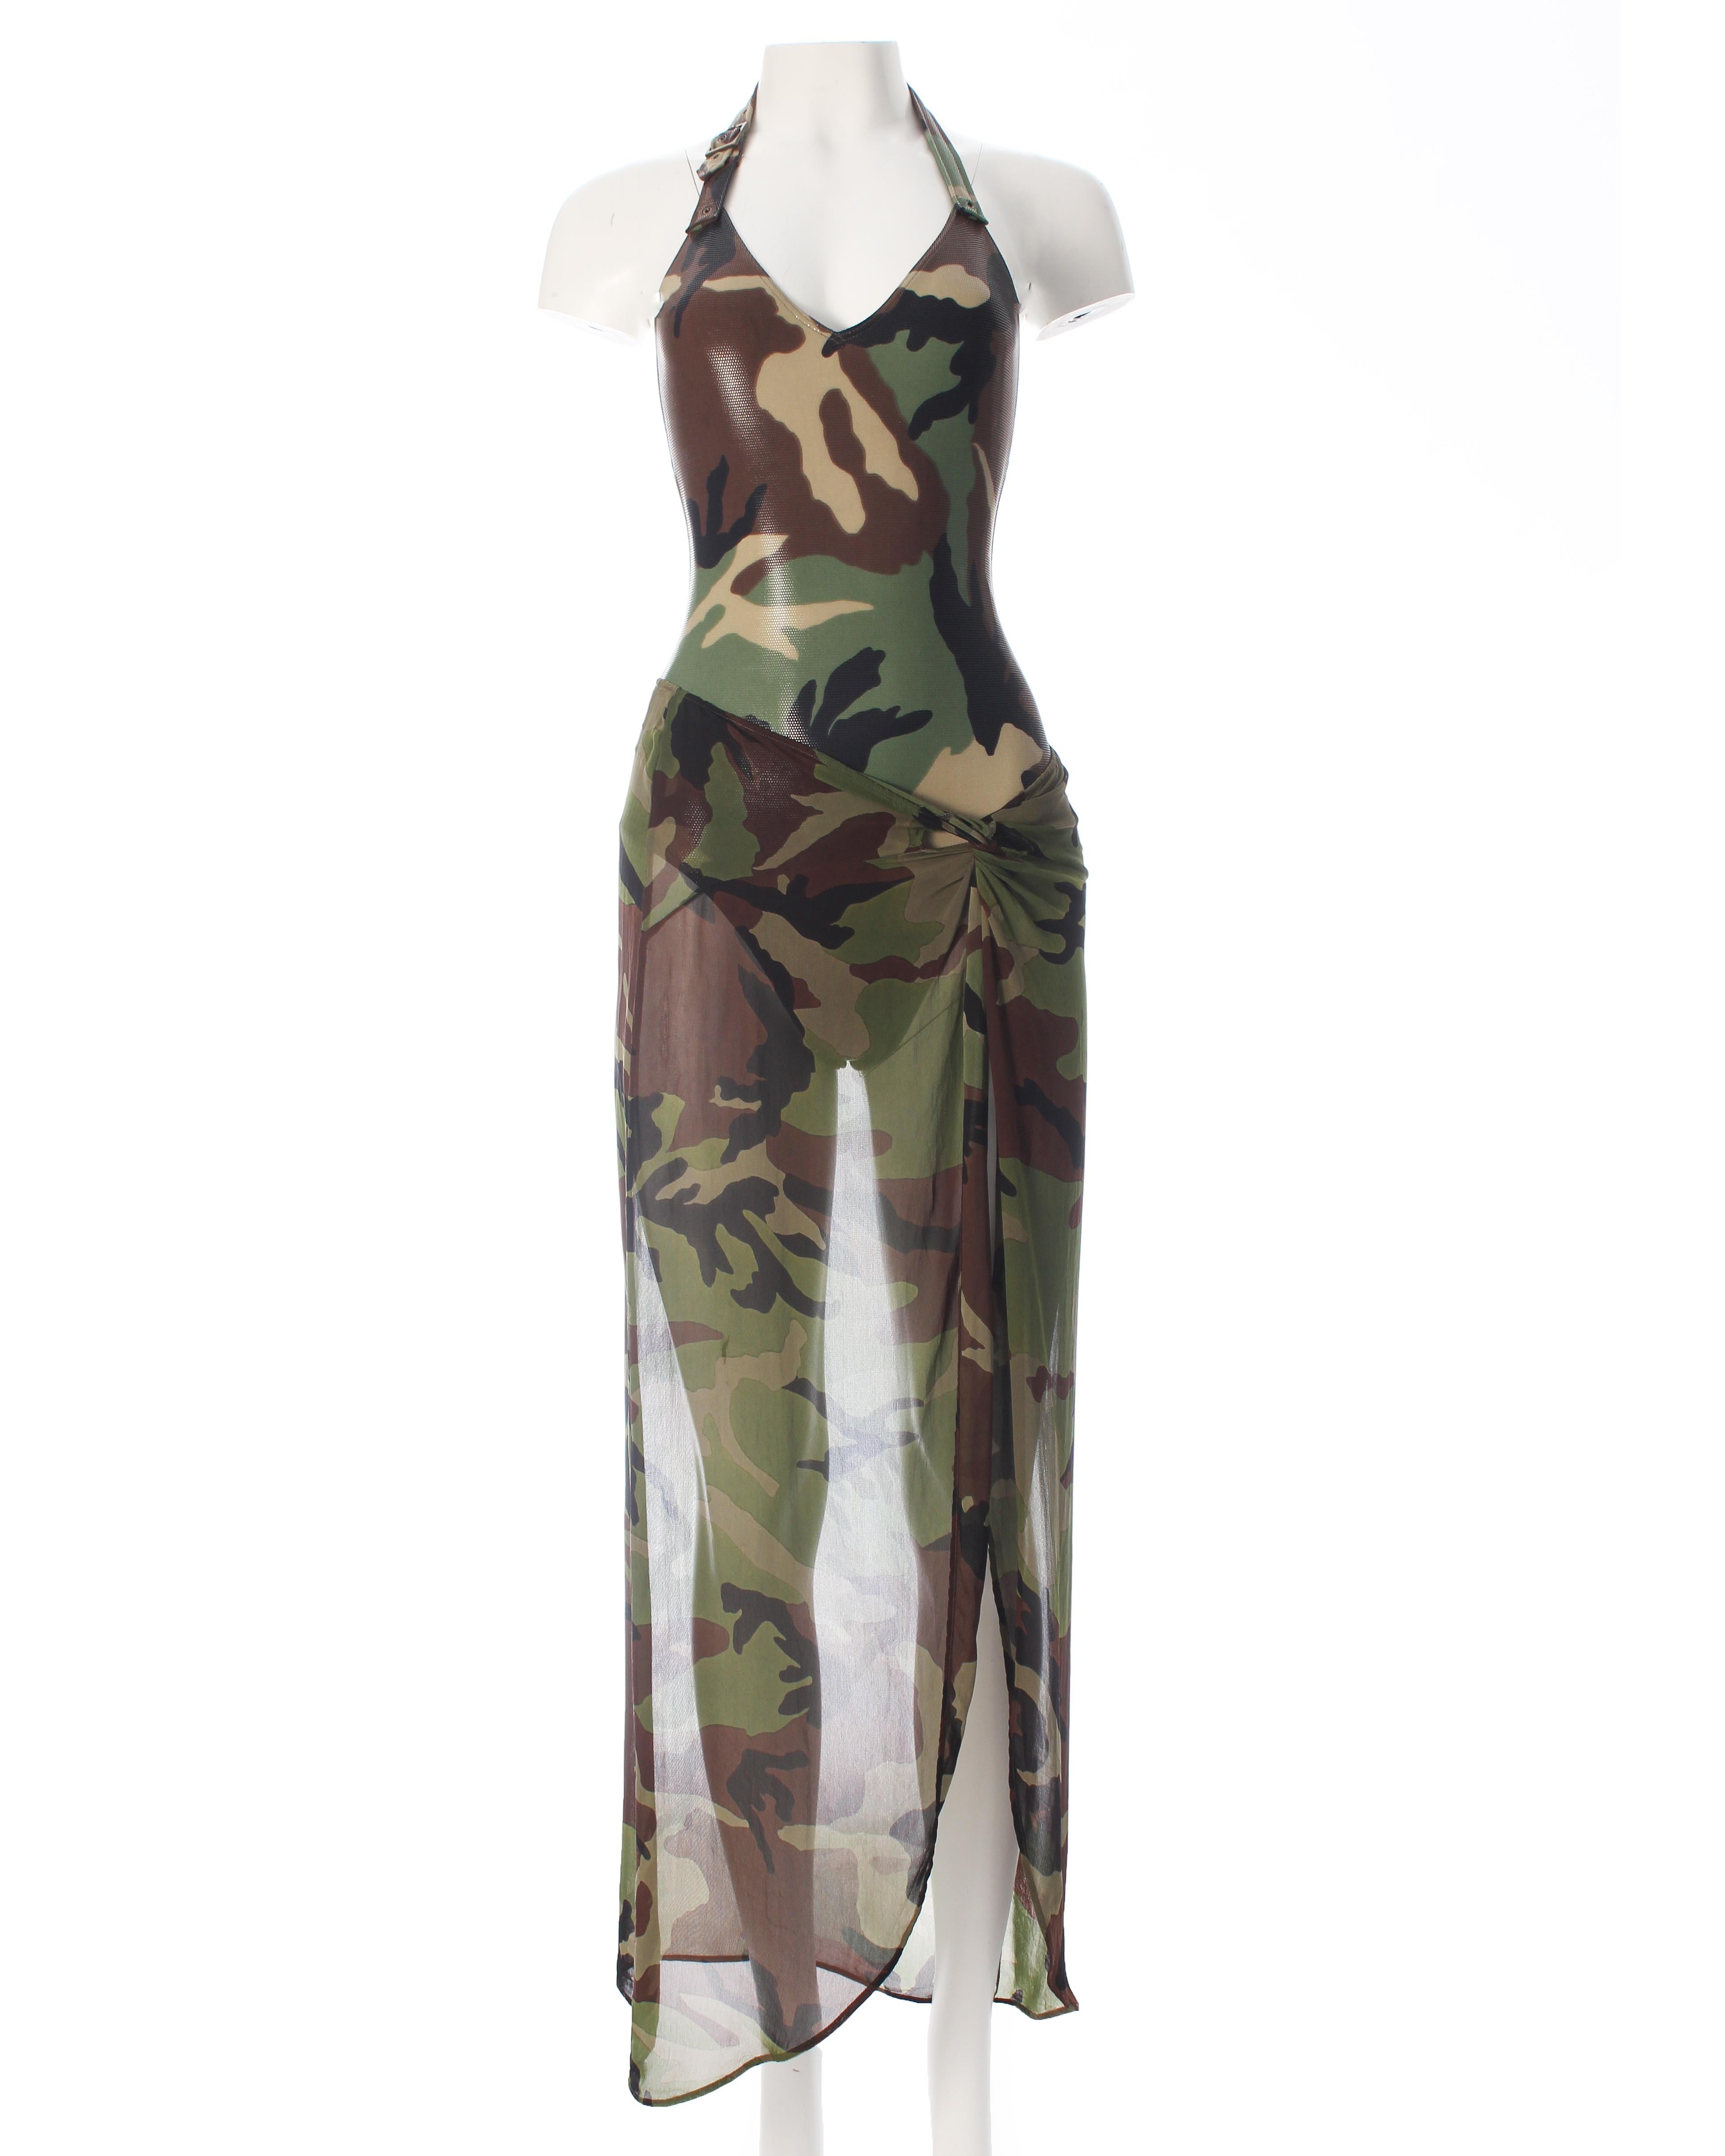 - camouflage printed lycra bodysuit with brass buckle on strap 
- semi-sheer sarong style viscose skirt with elastic waist and pre-tied knot 

Spring-Summer 2001